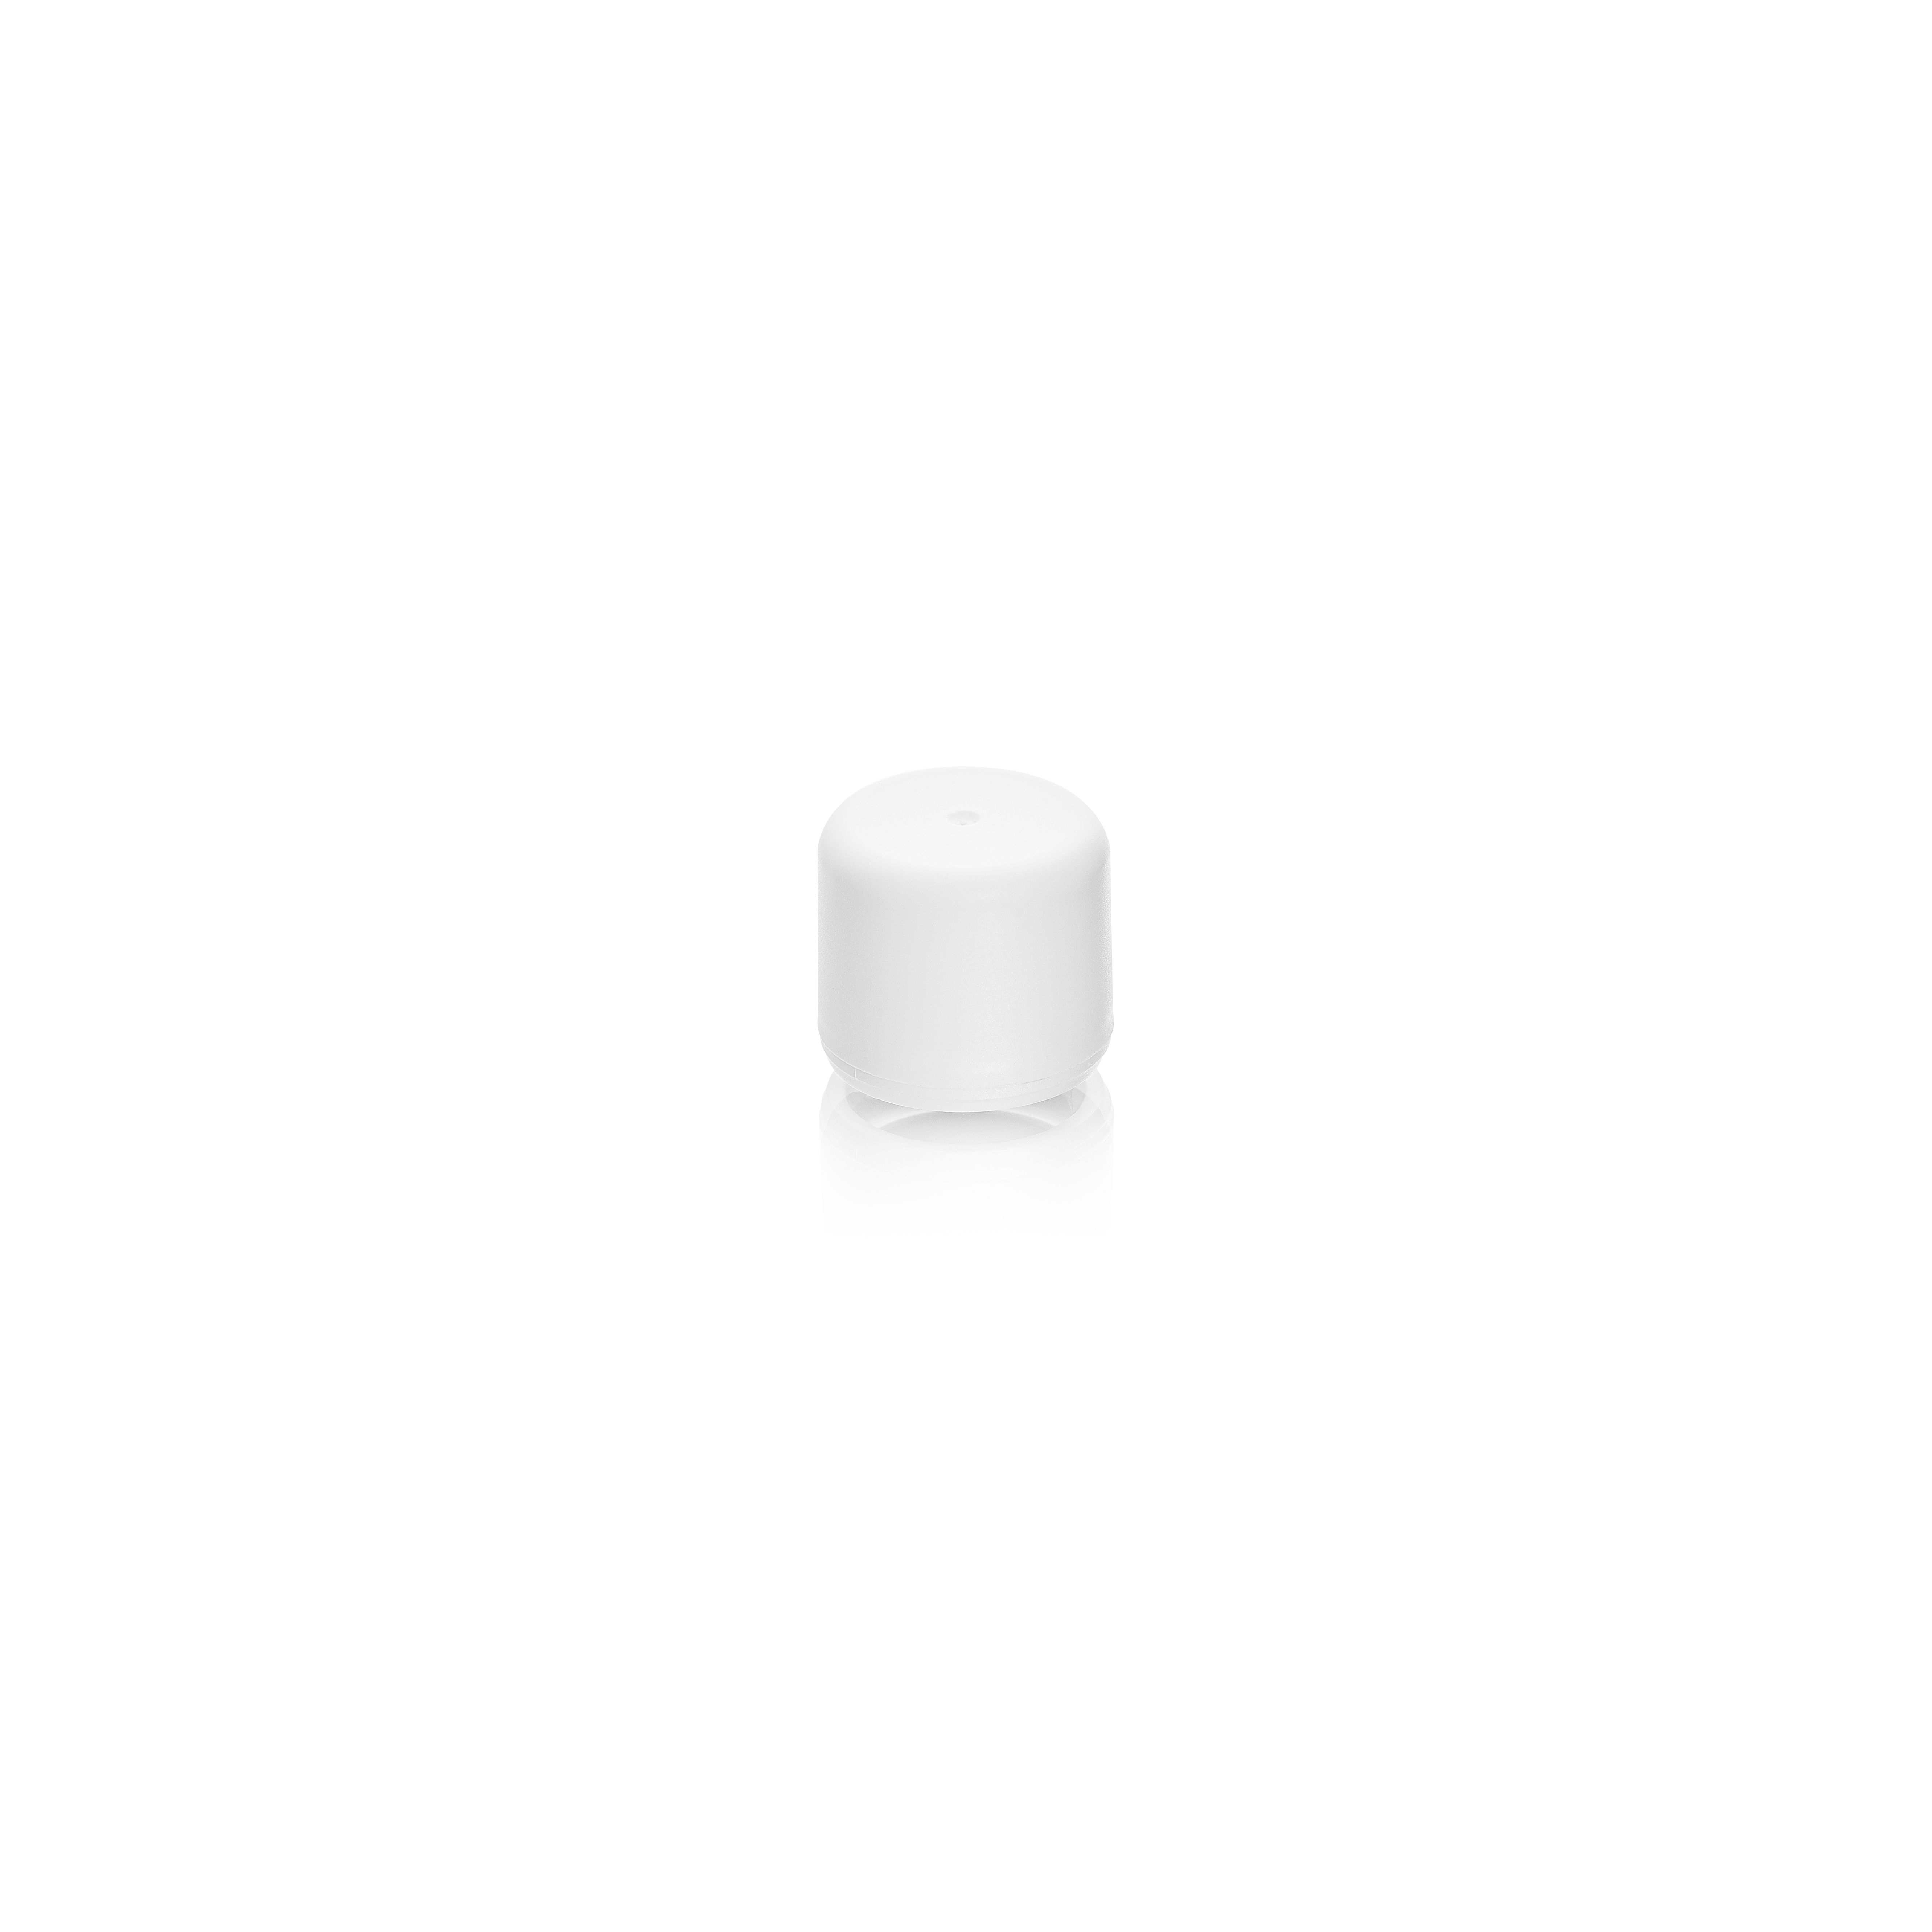 Screw cap tamper evident DIN18, IIID, PP, white, violet Phan inlay